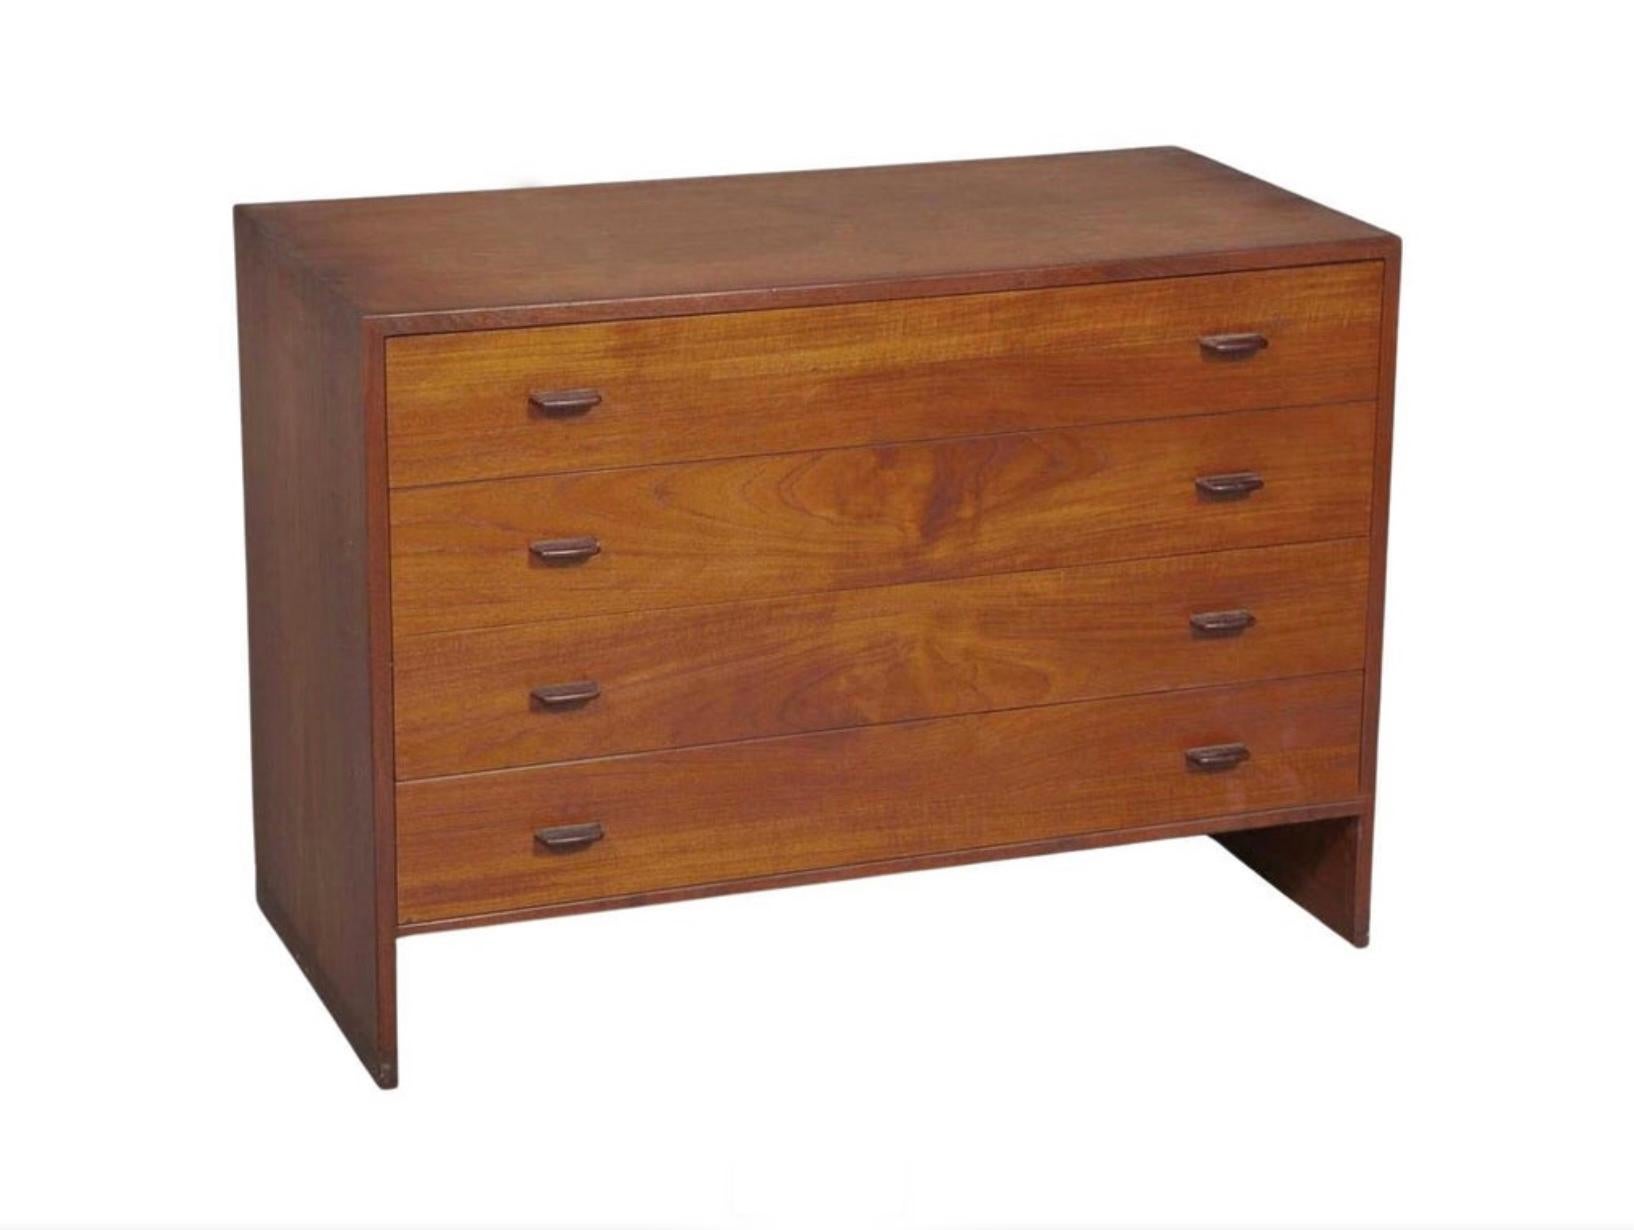 This Danish teak chest of drawers was designed by Hans J. Wegner in the 1950s. This 4 drawer dresser features great details of craftsmanship and shows a beautiful wood grain. Great vintage condition. Labeled on Back side. Made in Denmark. Located in